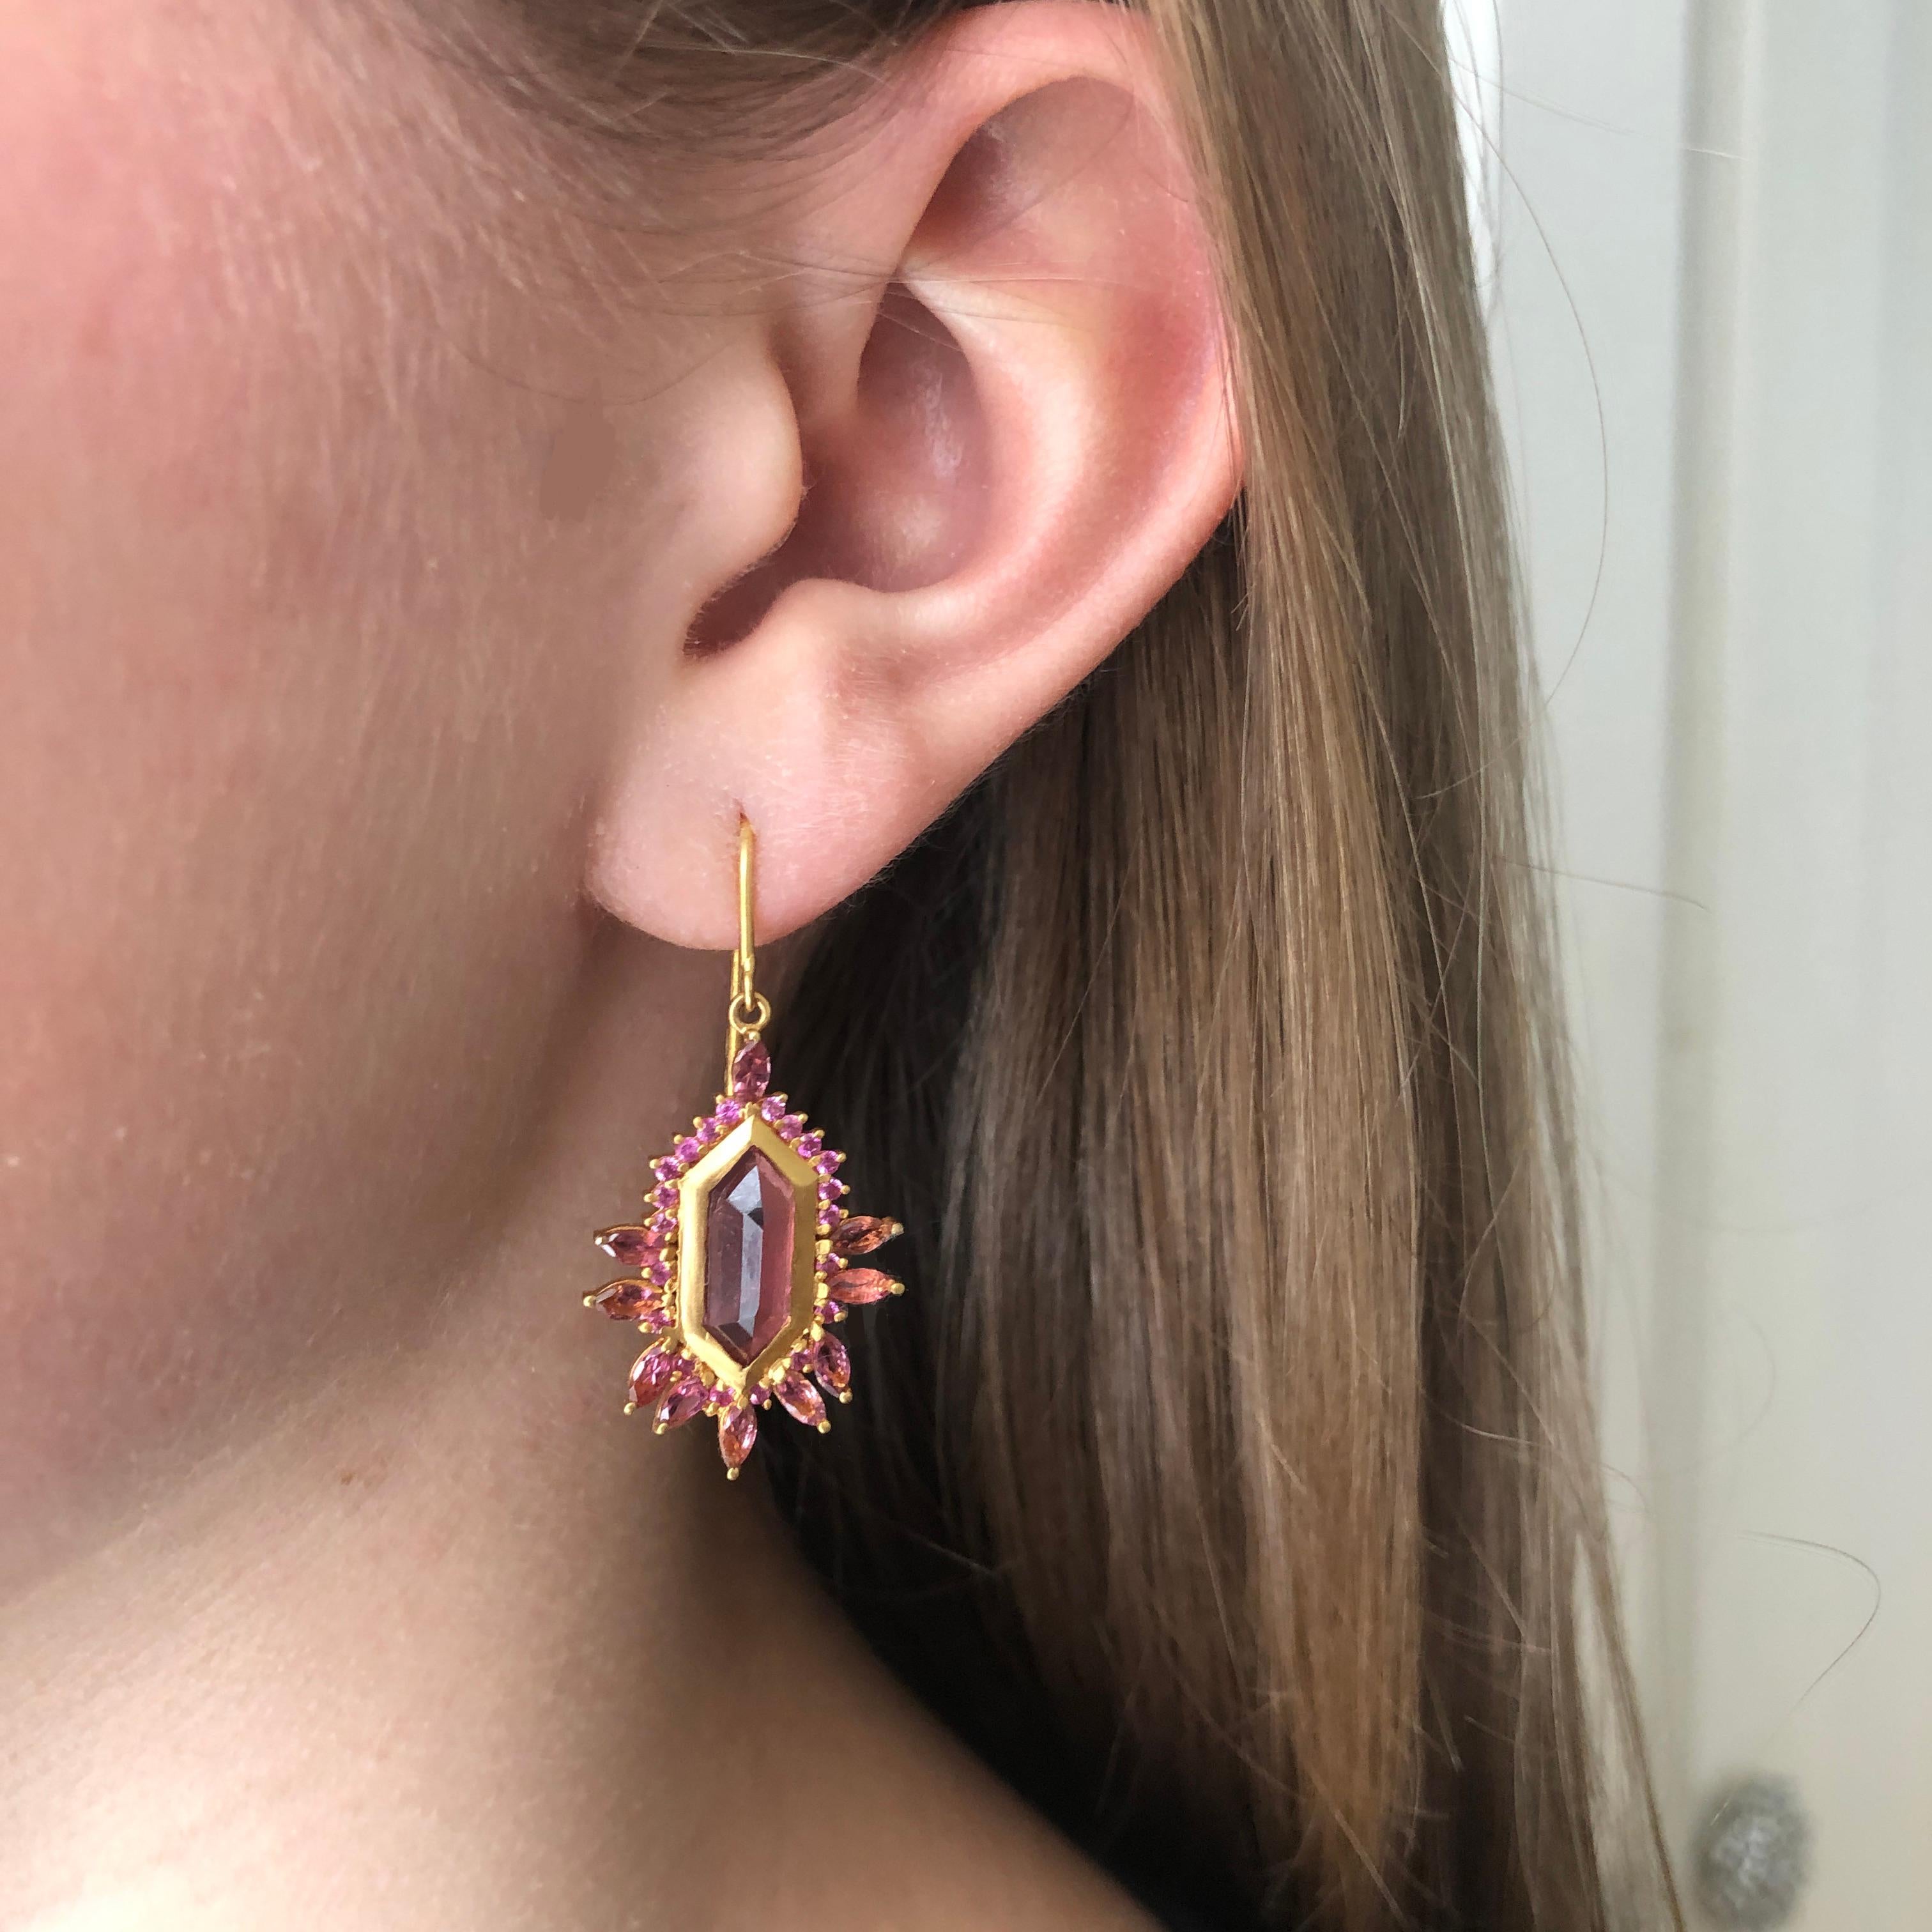 Designed by Lauren Harper, these faceted Pink Tourmaline 18kt Gold earrings are hand made with beautiful, vibrant and high quality stones. Solid 18kt matte Gold. Perfect finishing touch to every outfit, and lightweight enough for all day wear. Ships